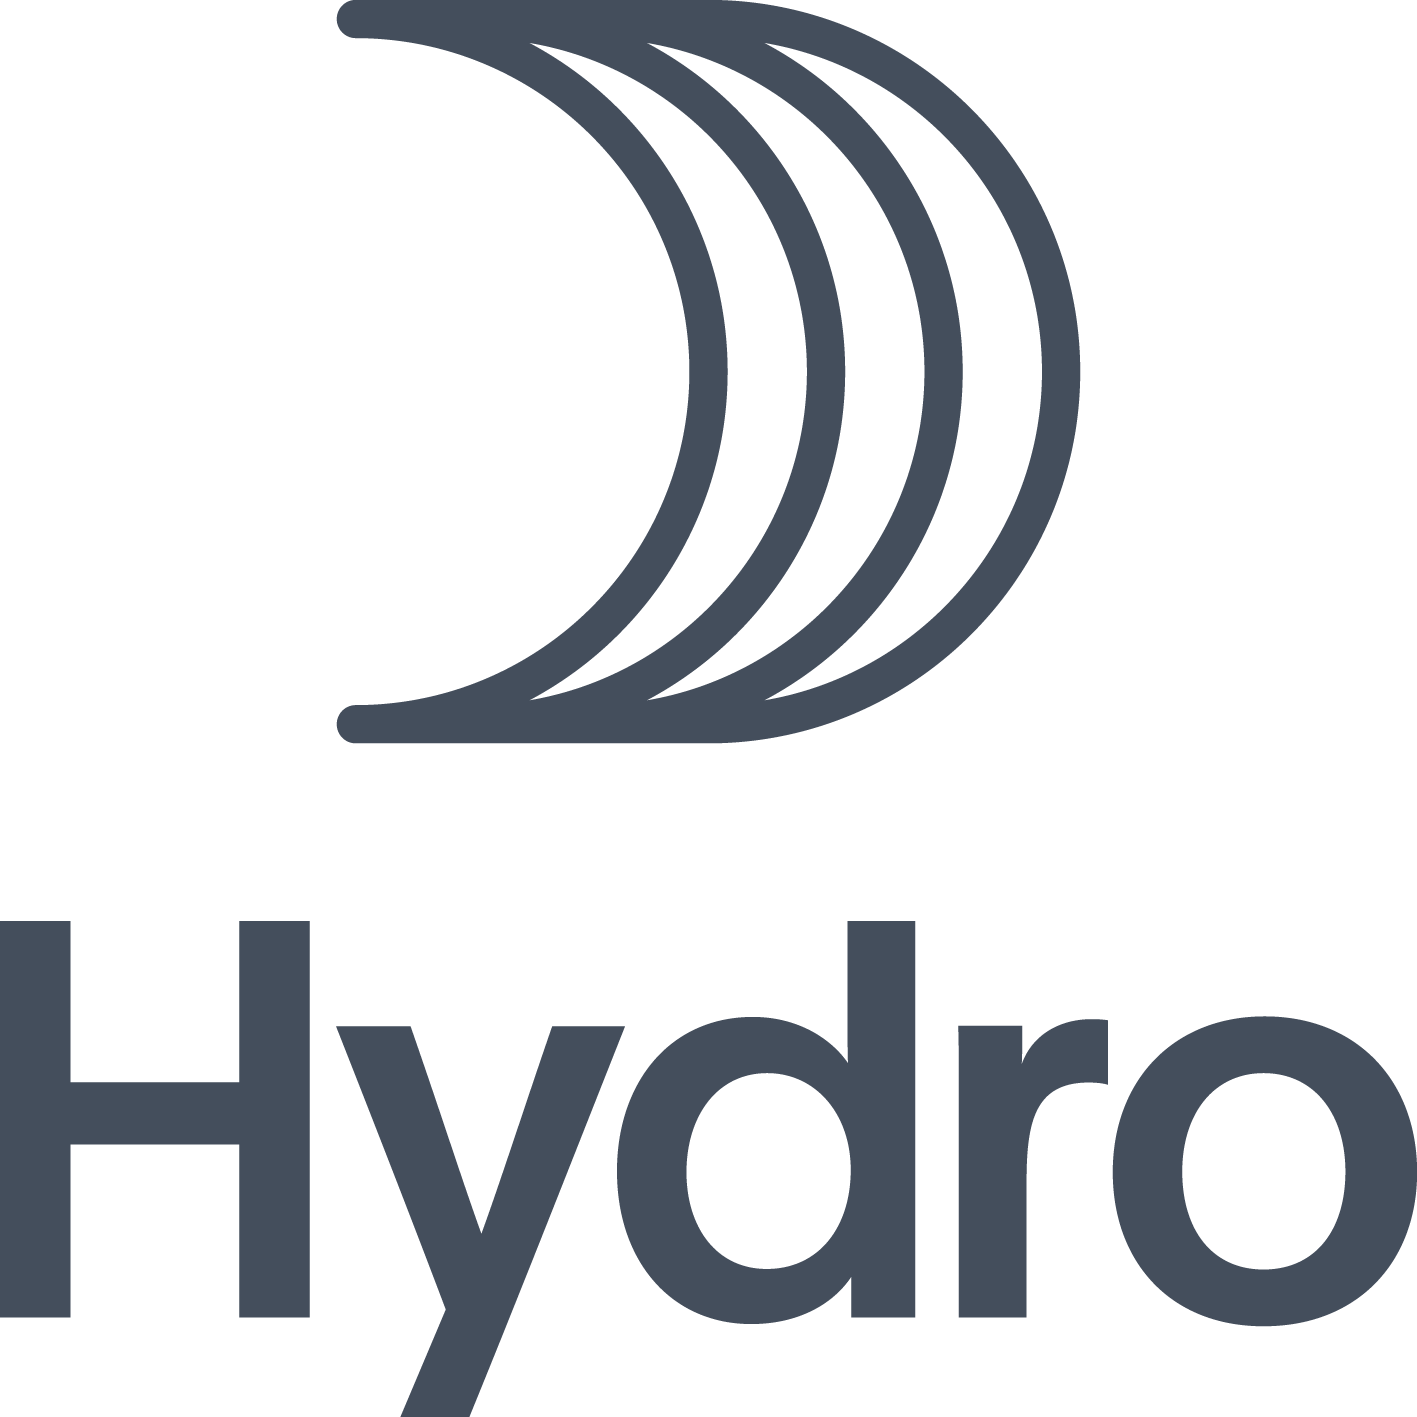 hydro_logo_vertical_blue.png